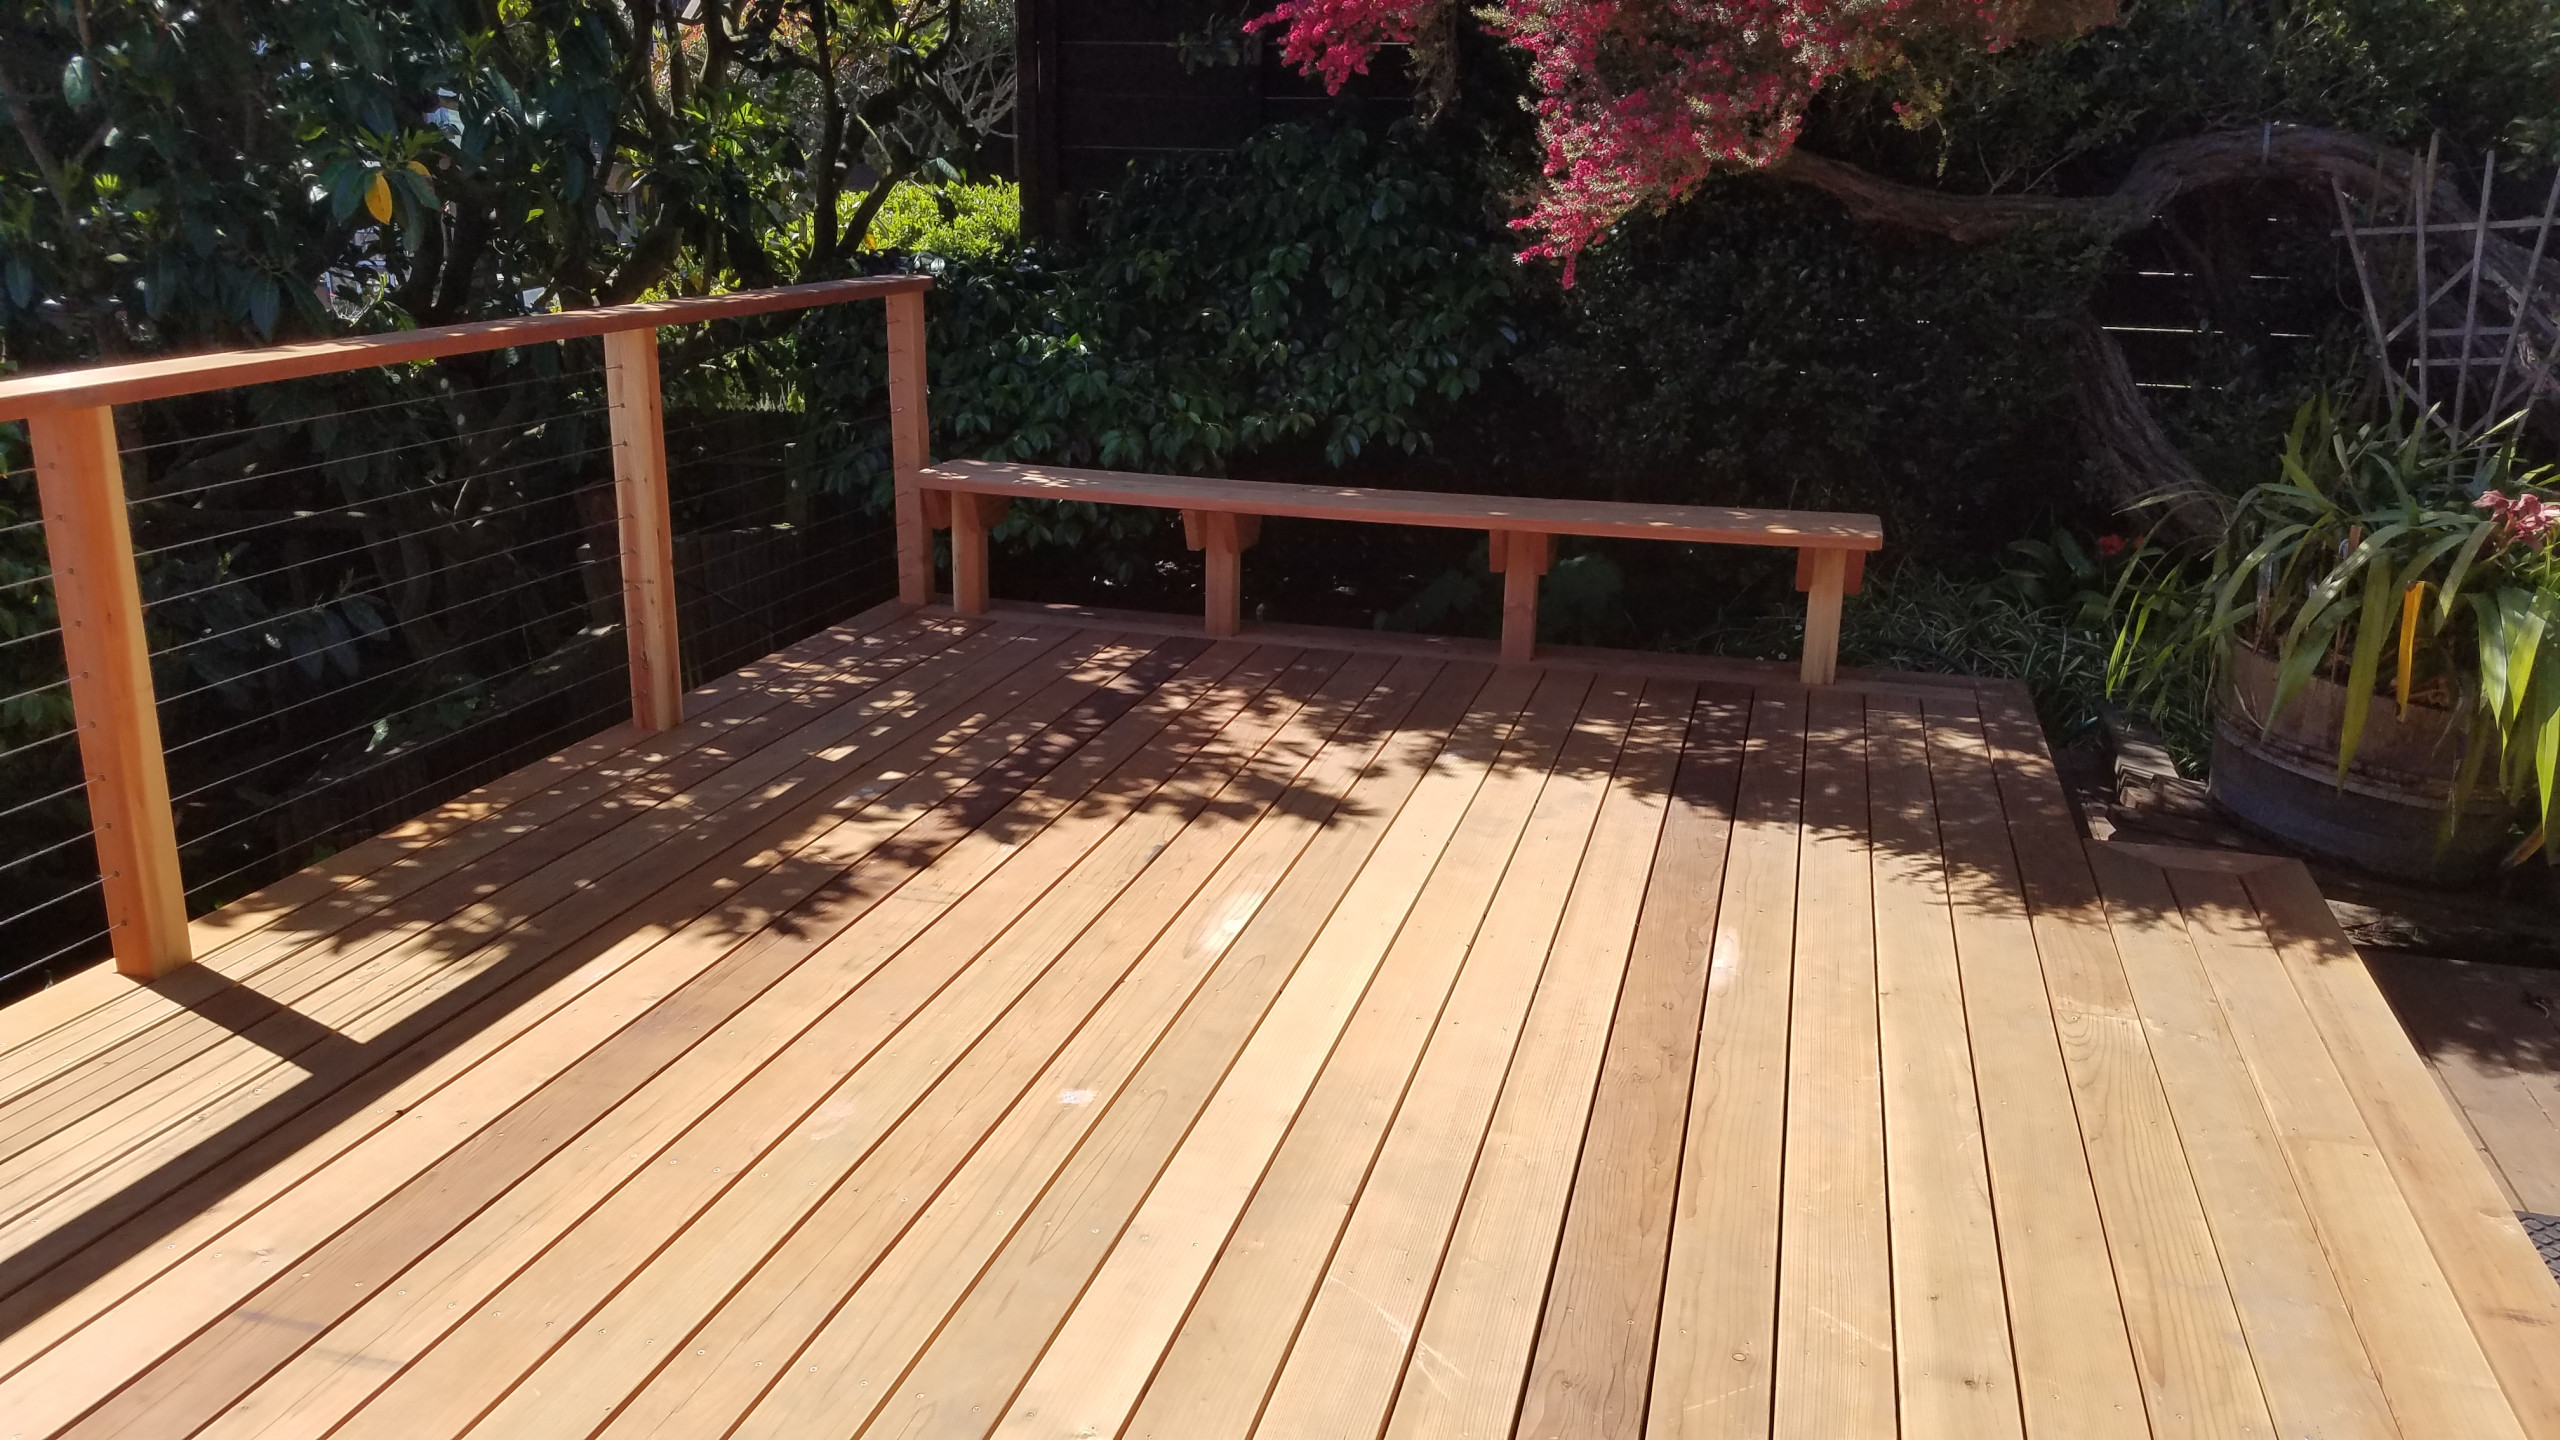 Install new deck,bench,with cable rail systems